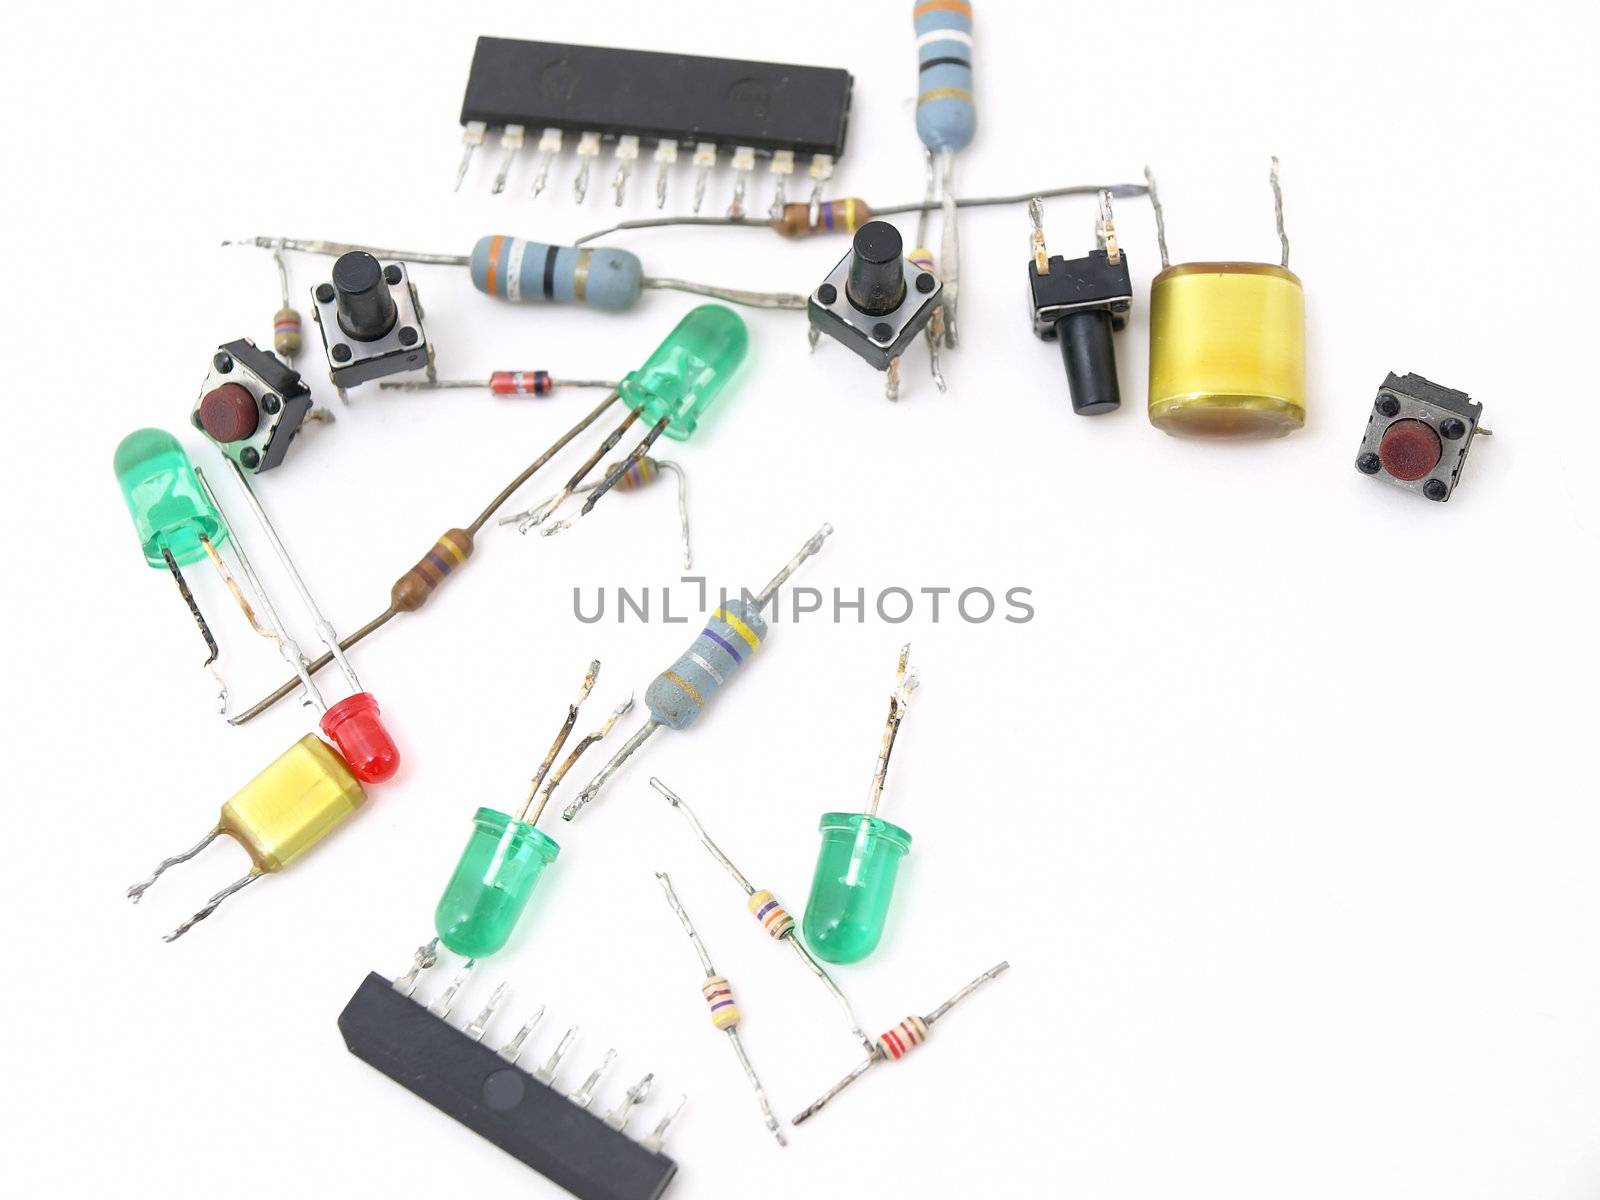 A variety of switches and LED light pieces isolated on a white background.